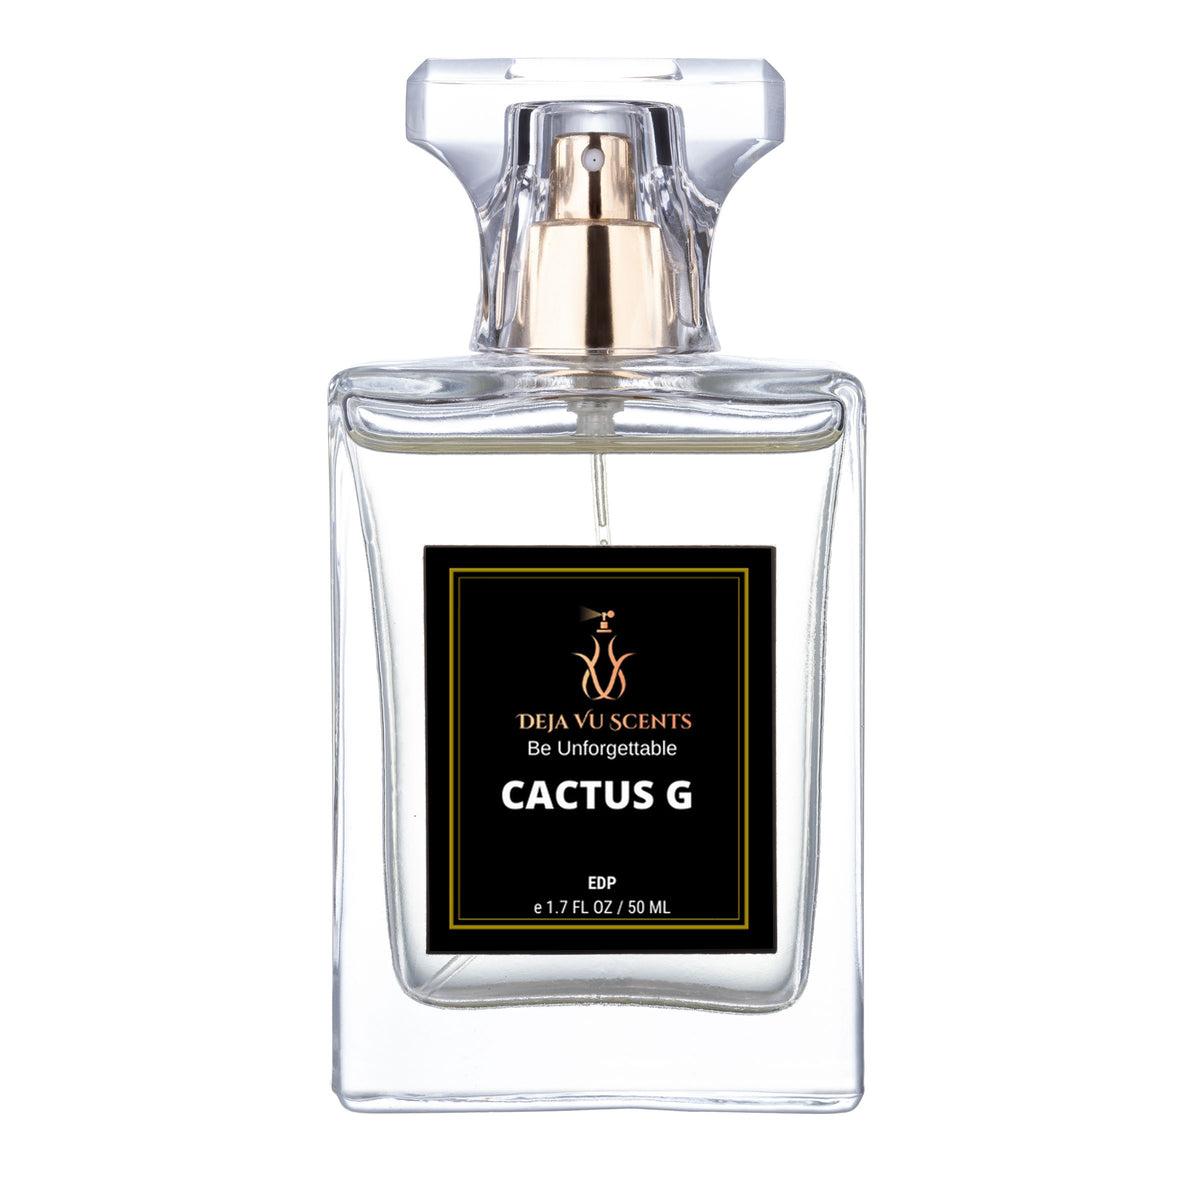 Cactus Garden by Louis Vuitton is a Citrus Aromatic fragrance for women and  men. Cactus Garden represents the contrast between the dry…